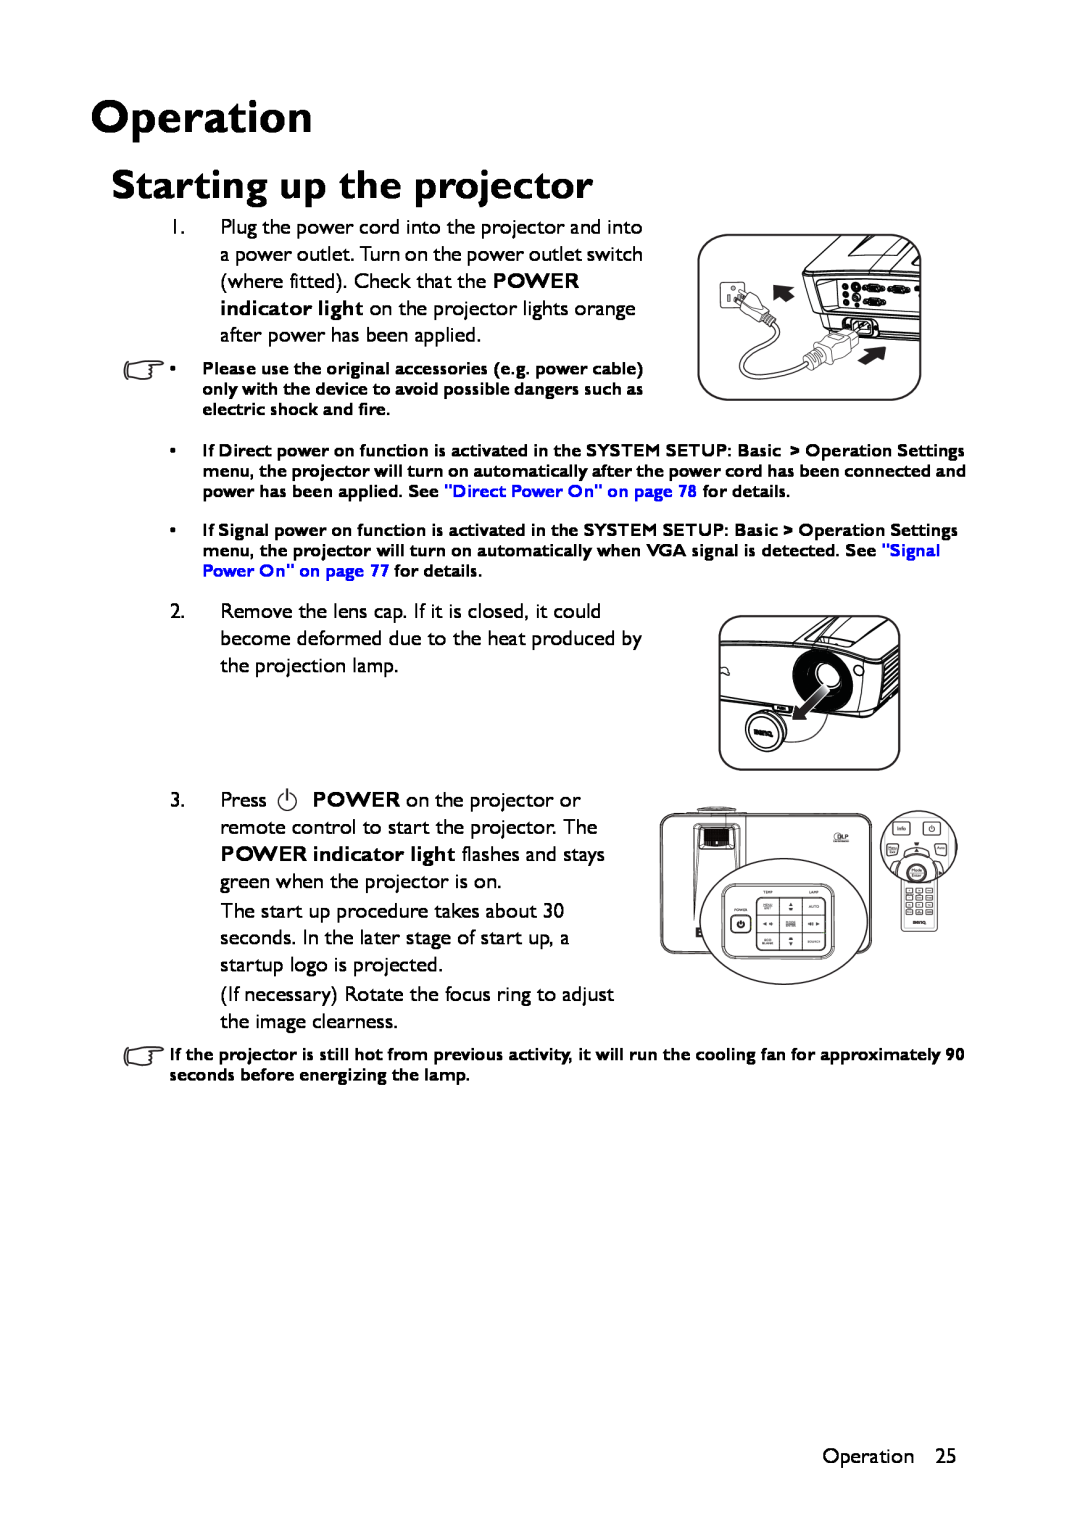 BenQ MX661 user manual Operation, Starting up the projector 